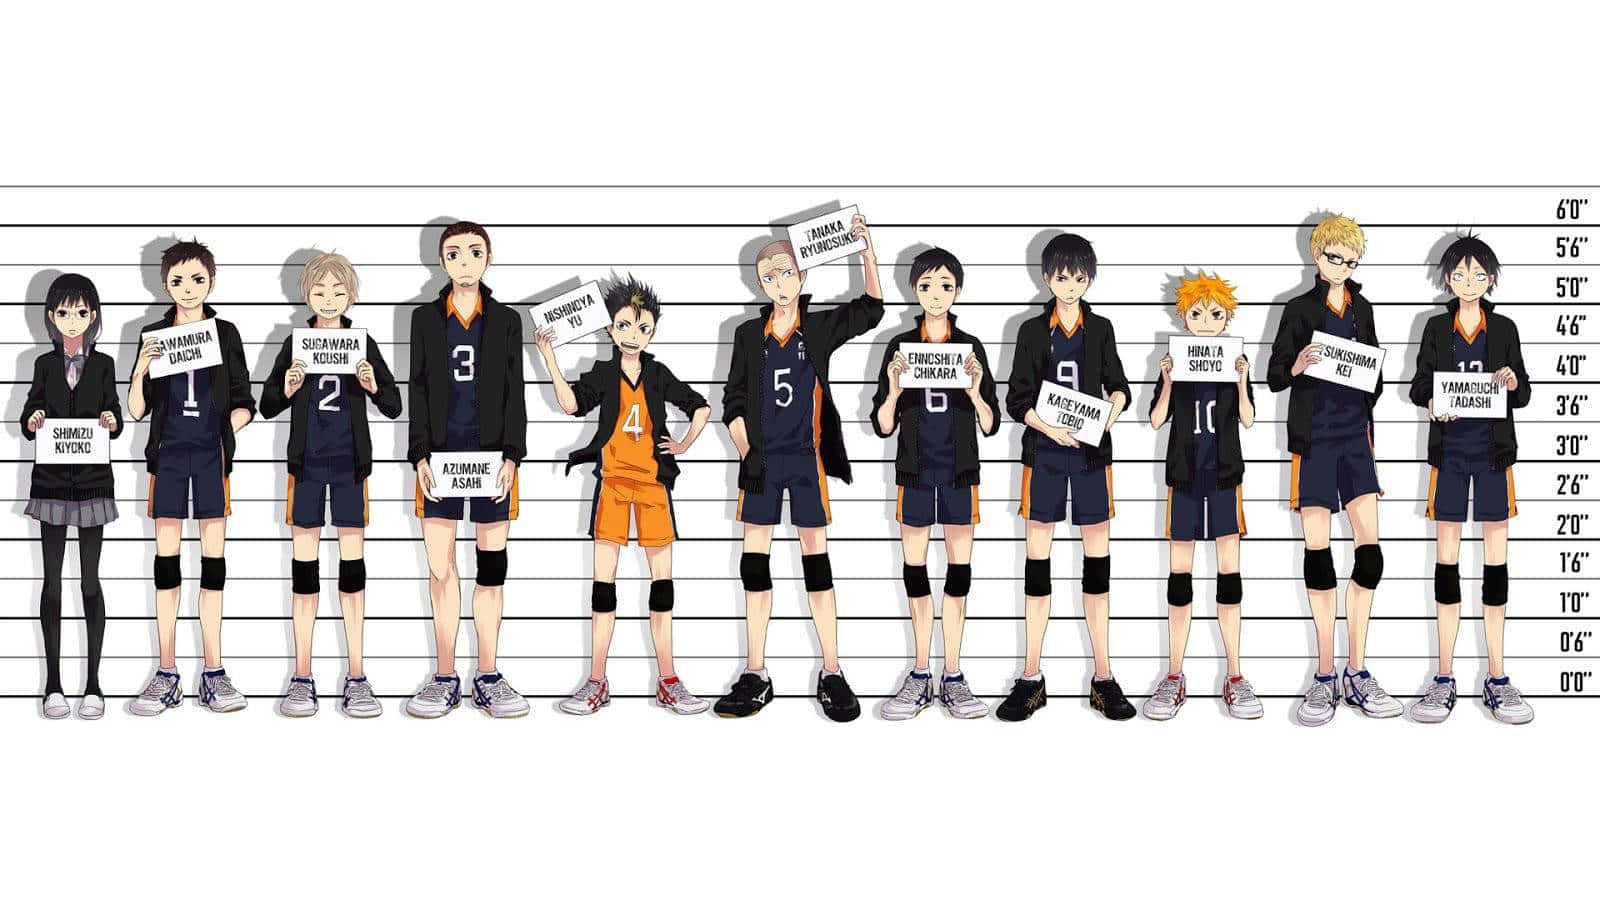 This Haikyuu Aesthetic Desktop will make you want to hit the court. Wallpaper